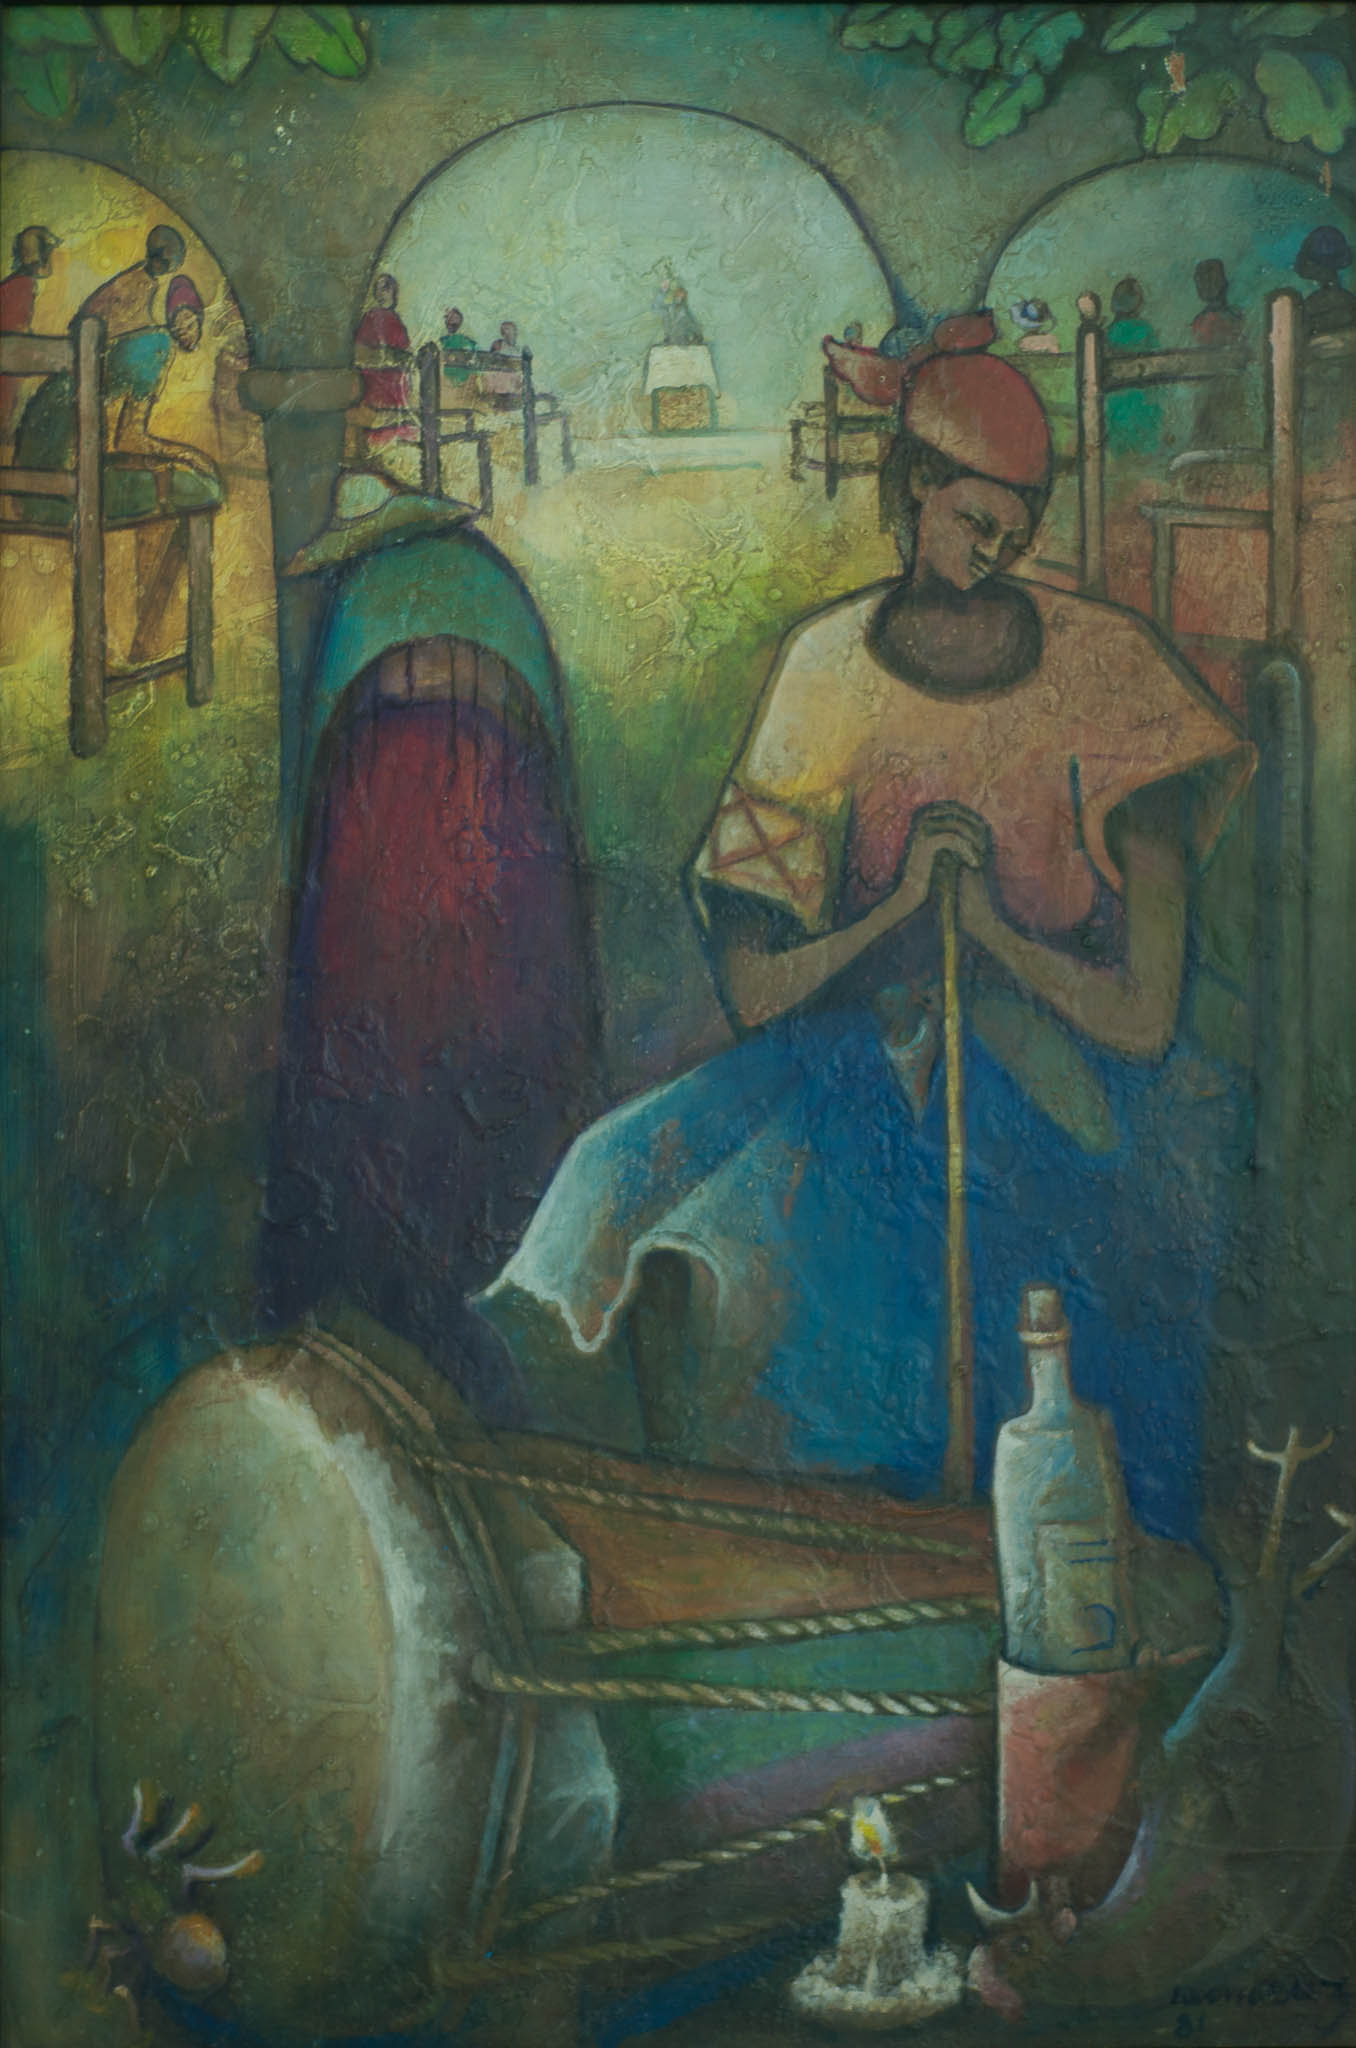 Woman with Drum, 1981